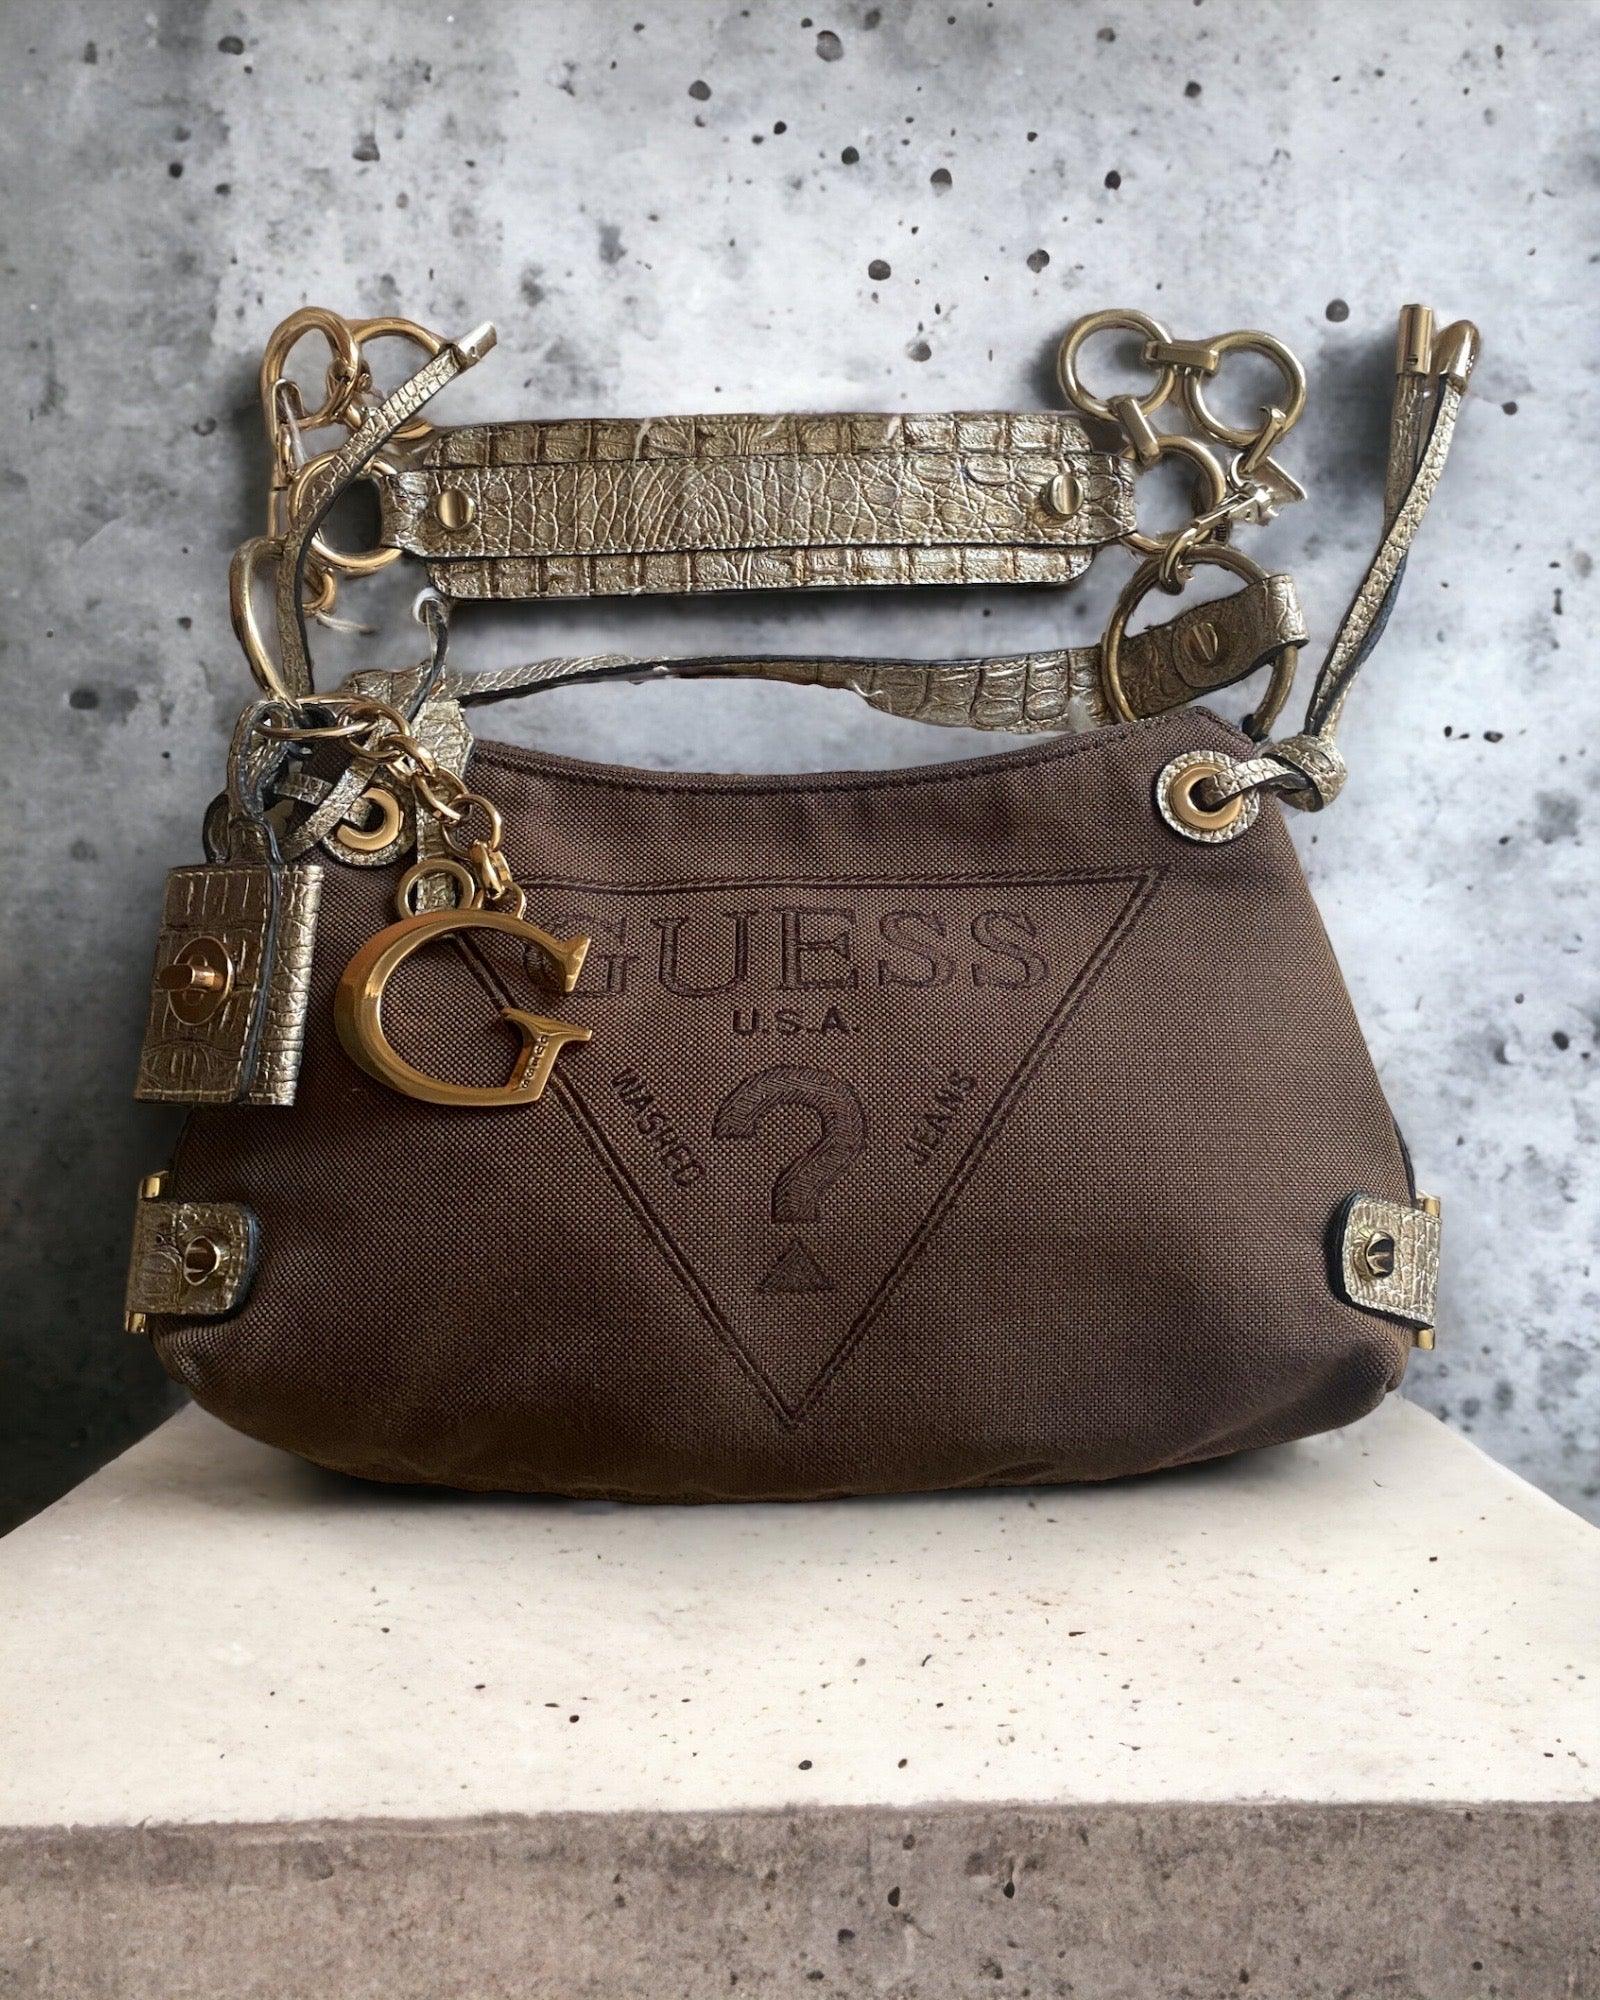 Guess Bag Cotton USA, Shoulderbag, Clothing & House Linens, Second hand,  dimanoinmano.it